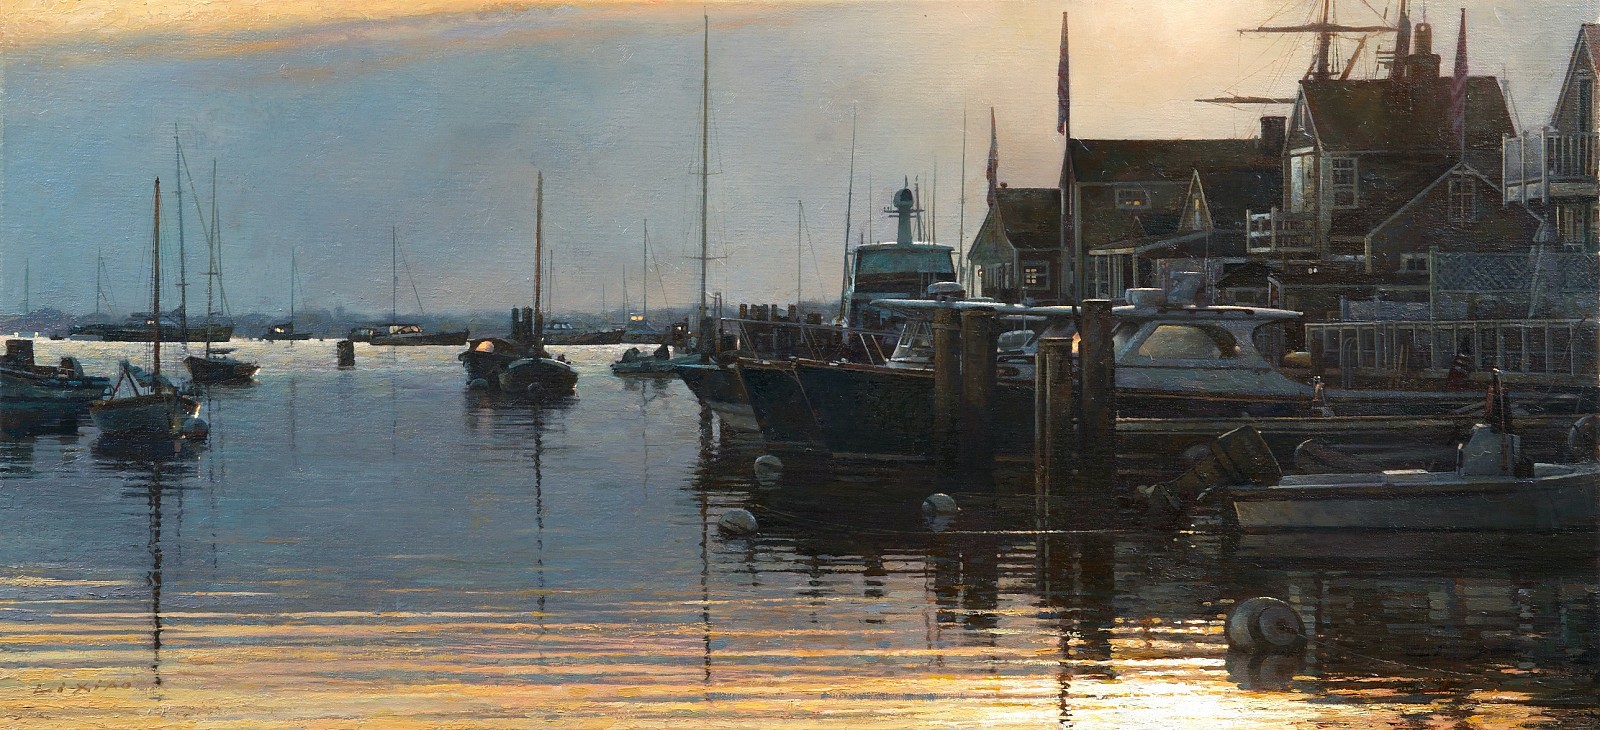 Li Xiao, The Bay of Dawn, 2022
oil on canvas, 16 x 34 in.
LX042204